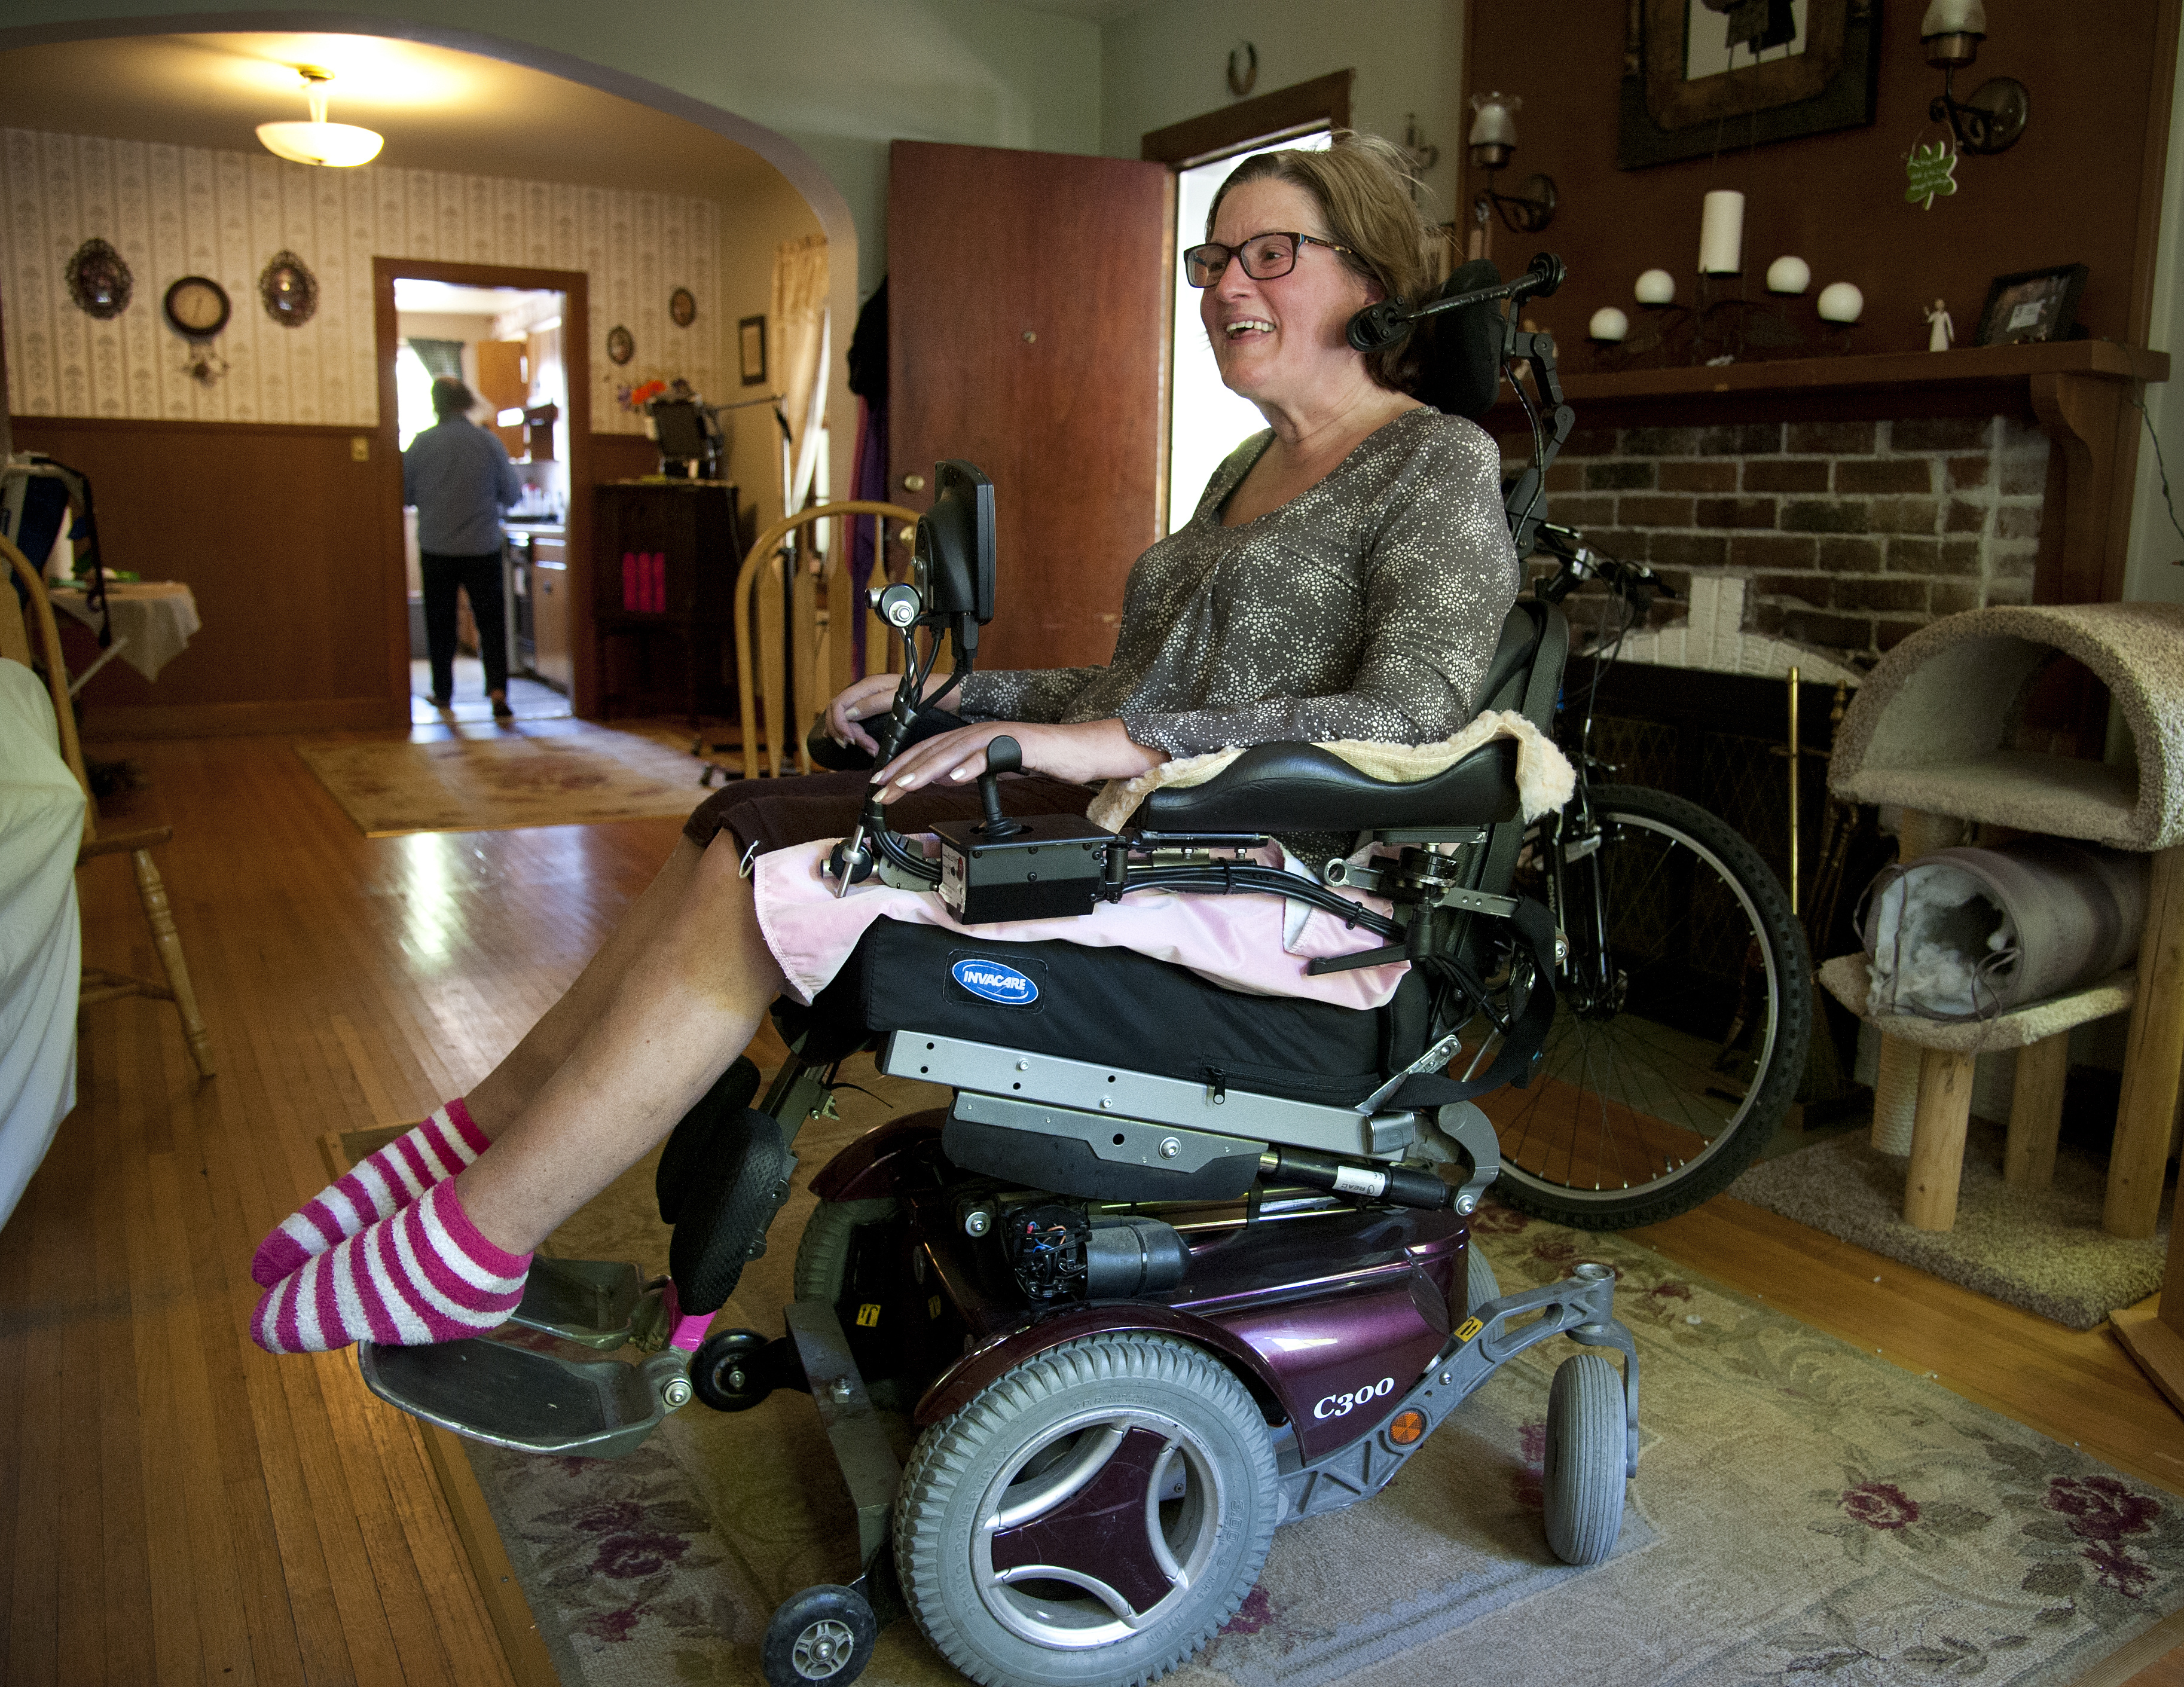 Fundraiser in Spokane Valley goes for woman's wheelchair